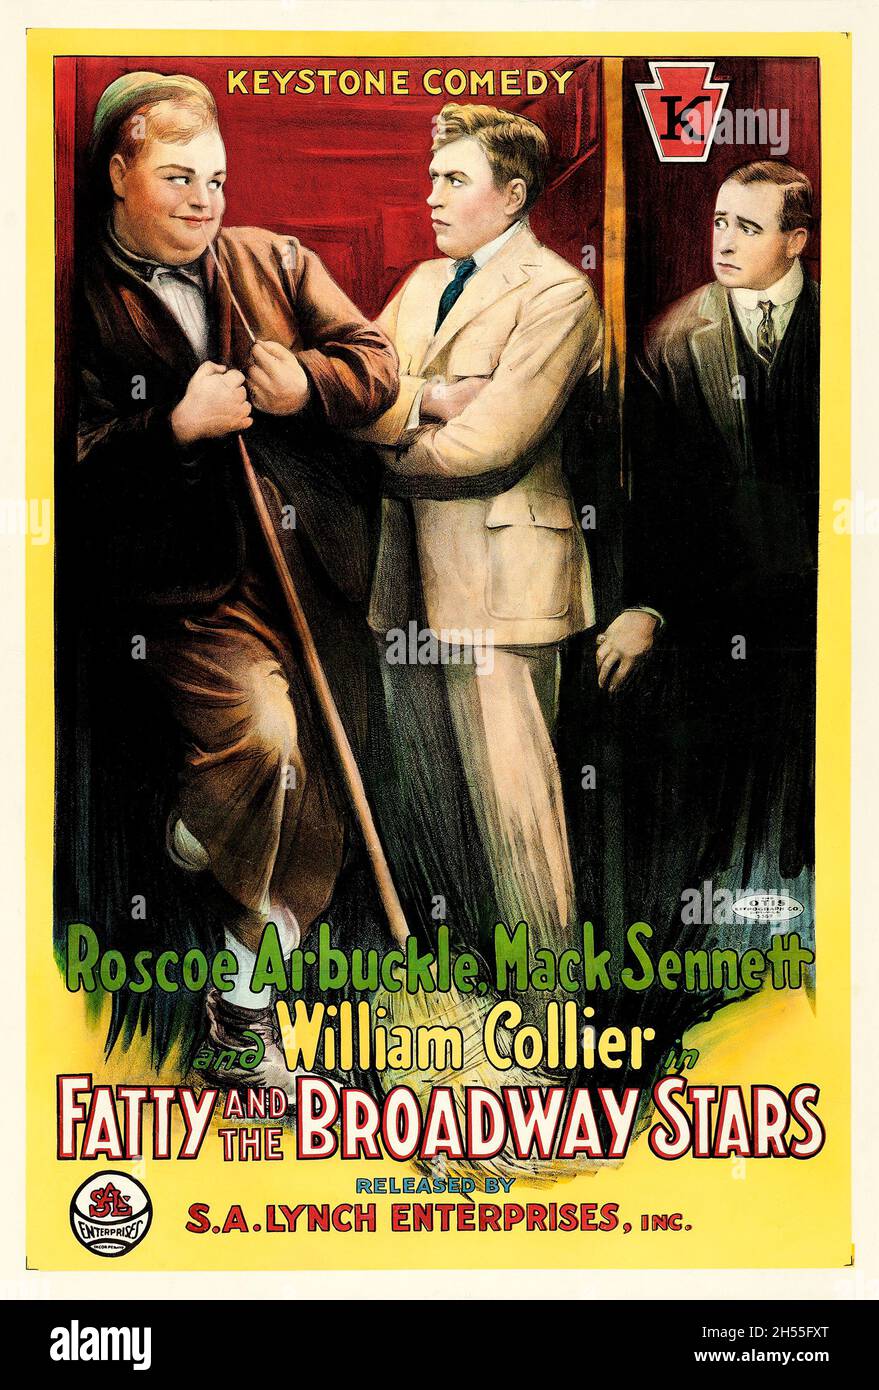 Vintage movie poster for the 1915 film Fatty and the Broadway Stars - Roscoe Arbuckle, Mack Sennett. Keystone Comedy. Stock Photo